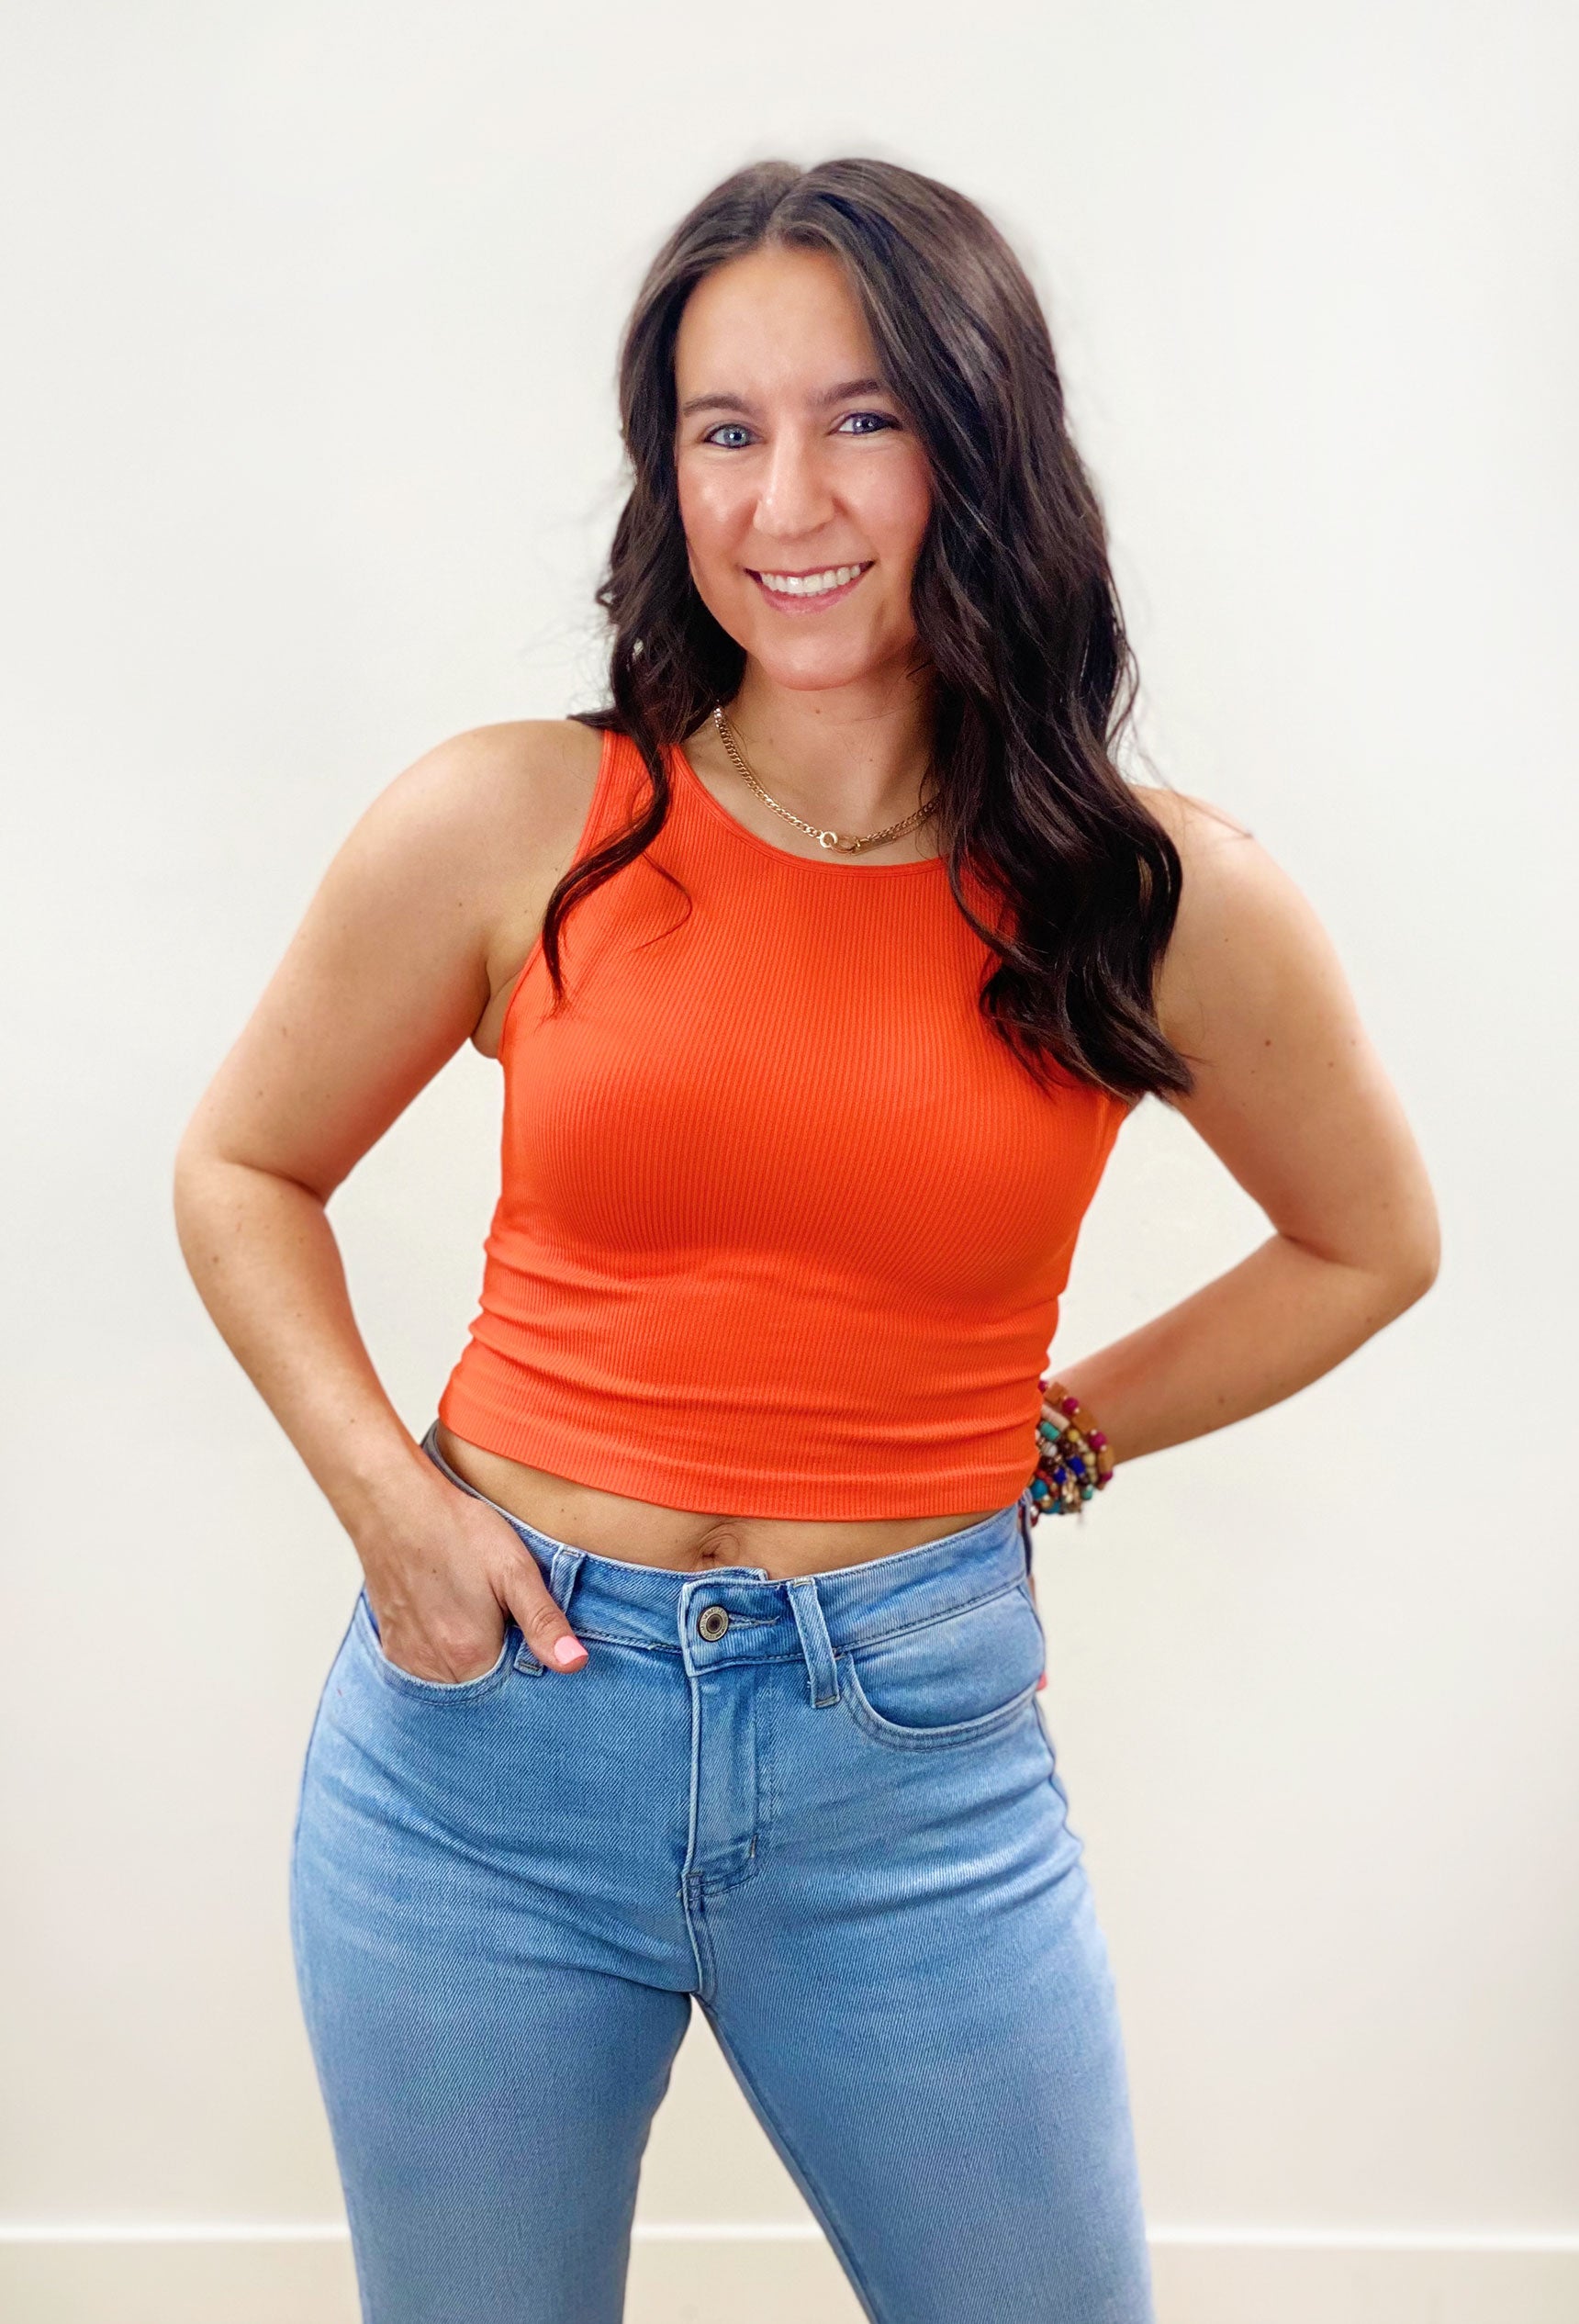 Ribbed High Neck Crop Top in Cherri Tomato, ribbed tank crop top